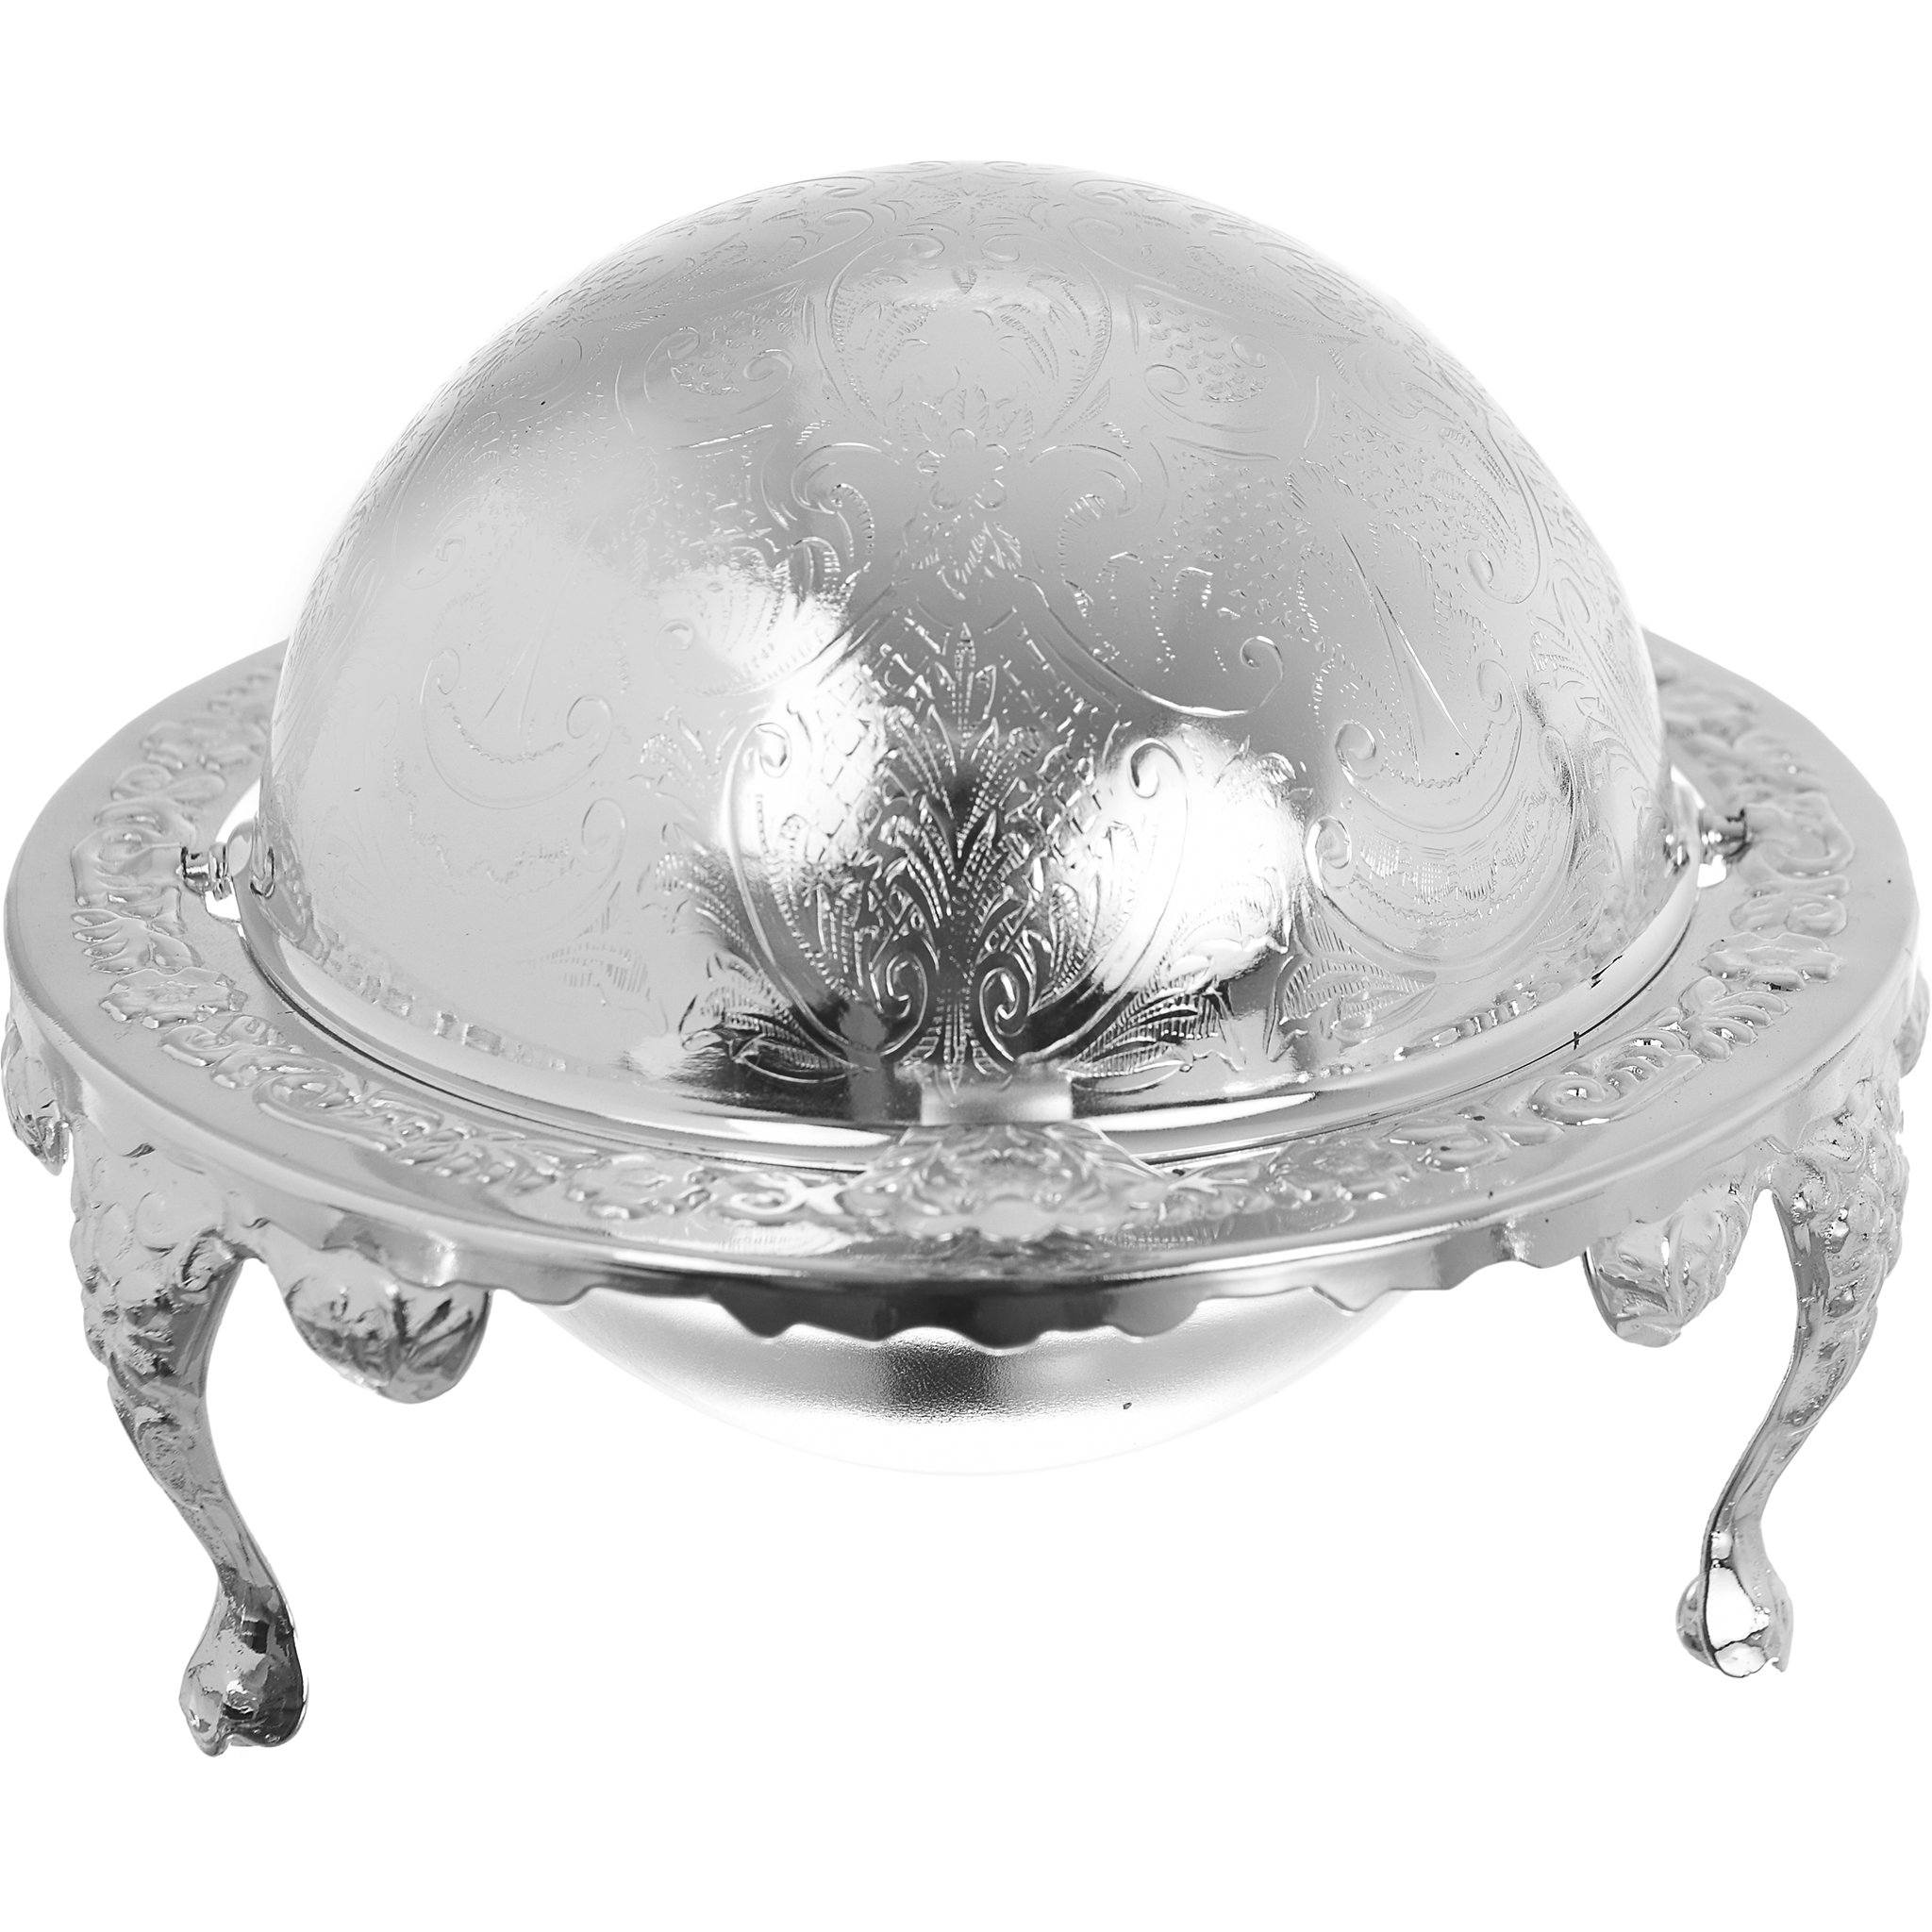 Queen Anne - Round Butter Dish with Revolving Cover & Legs - Silver Plated Metal & Glass - 14x11cm - 26000260